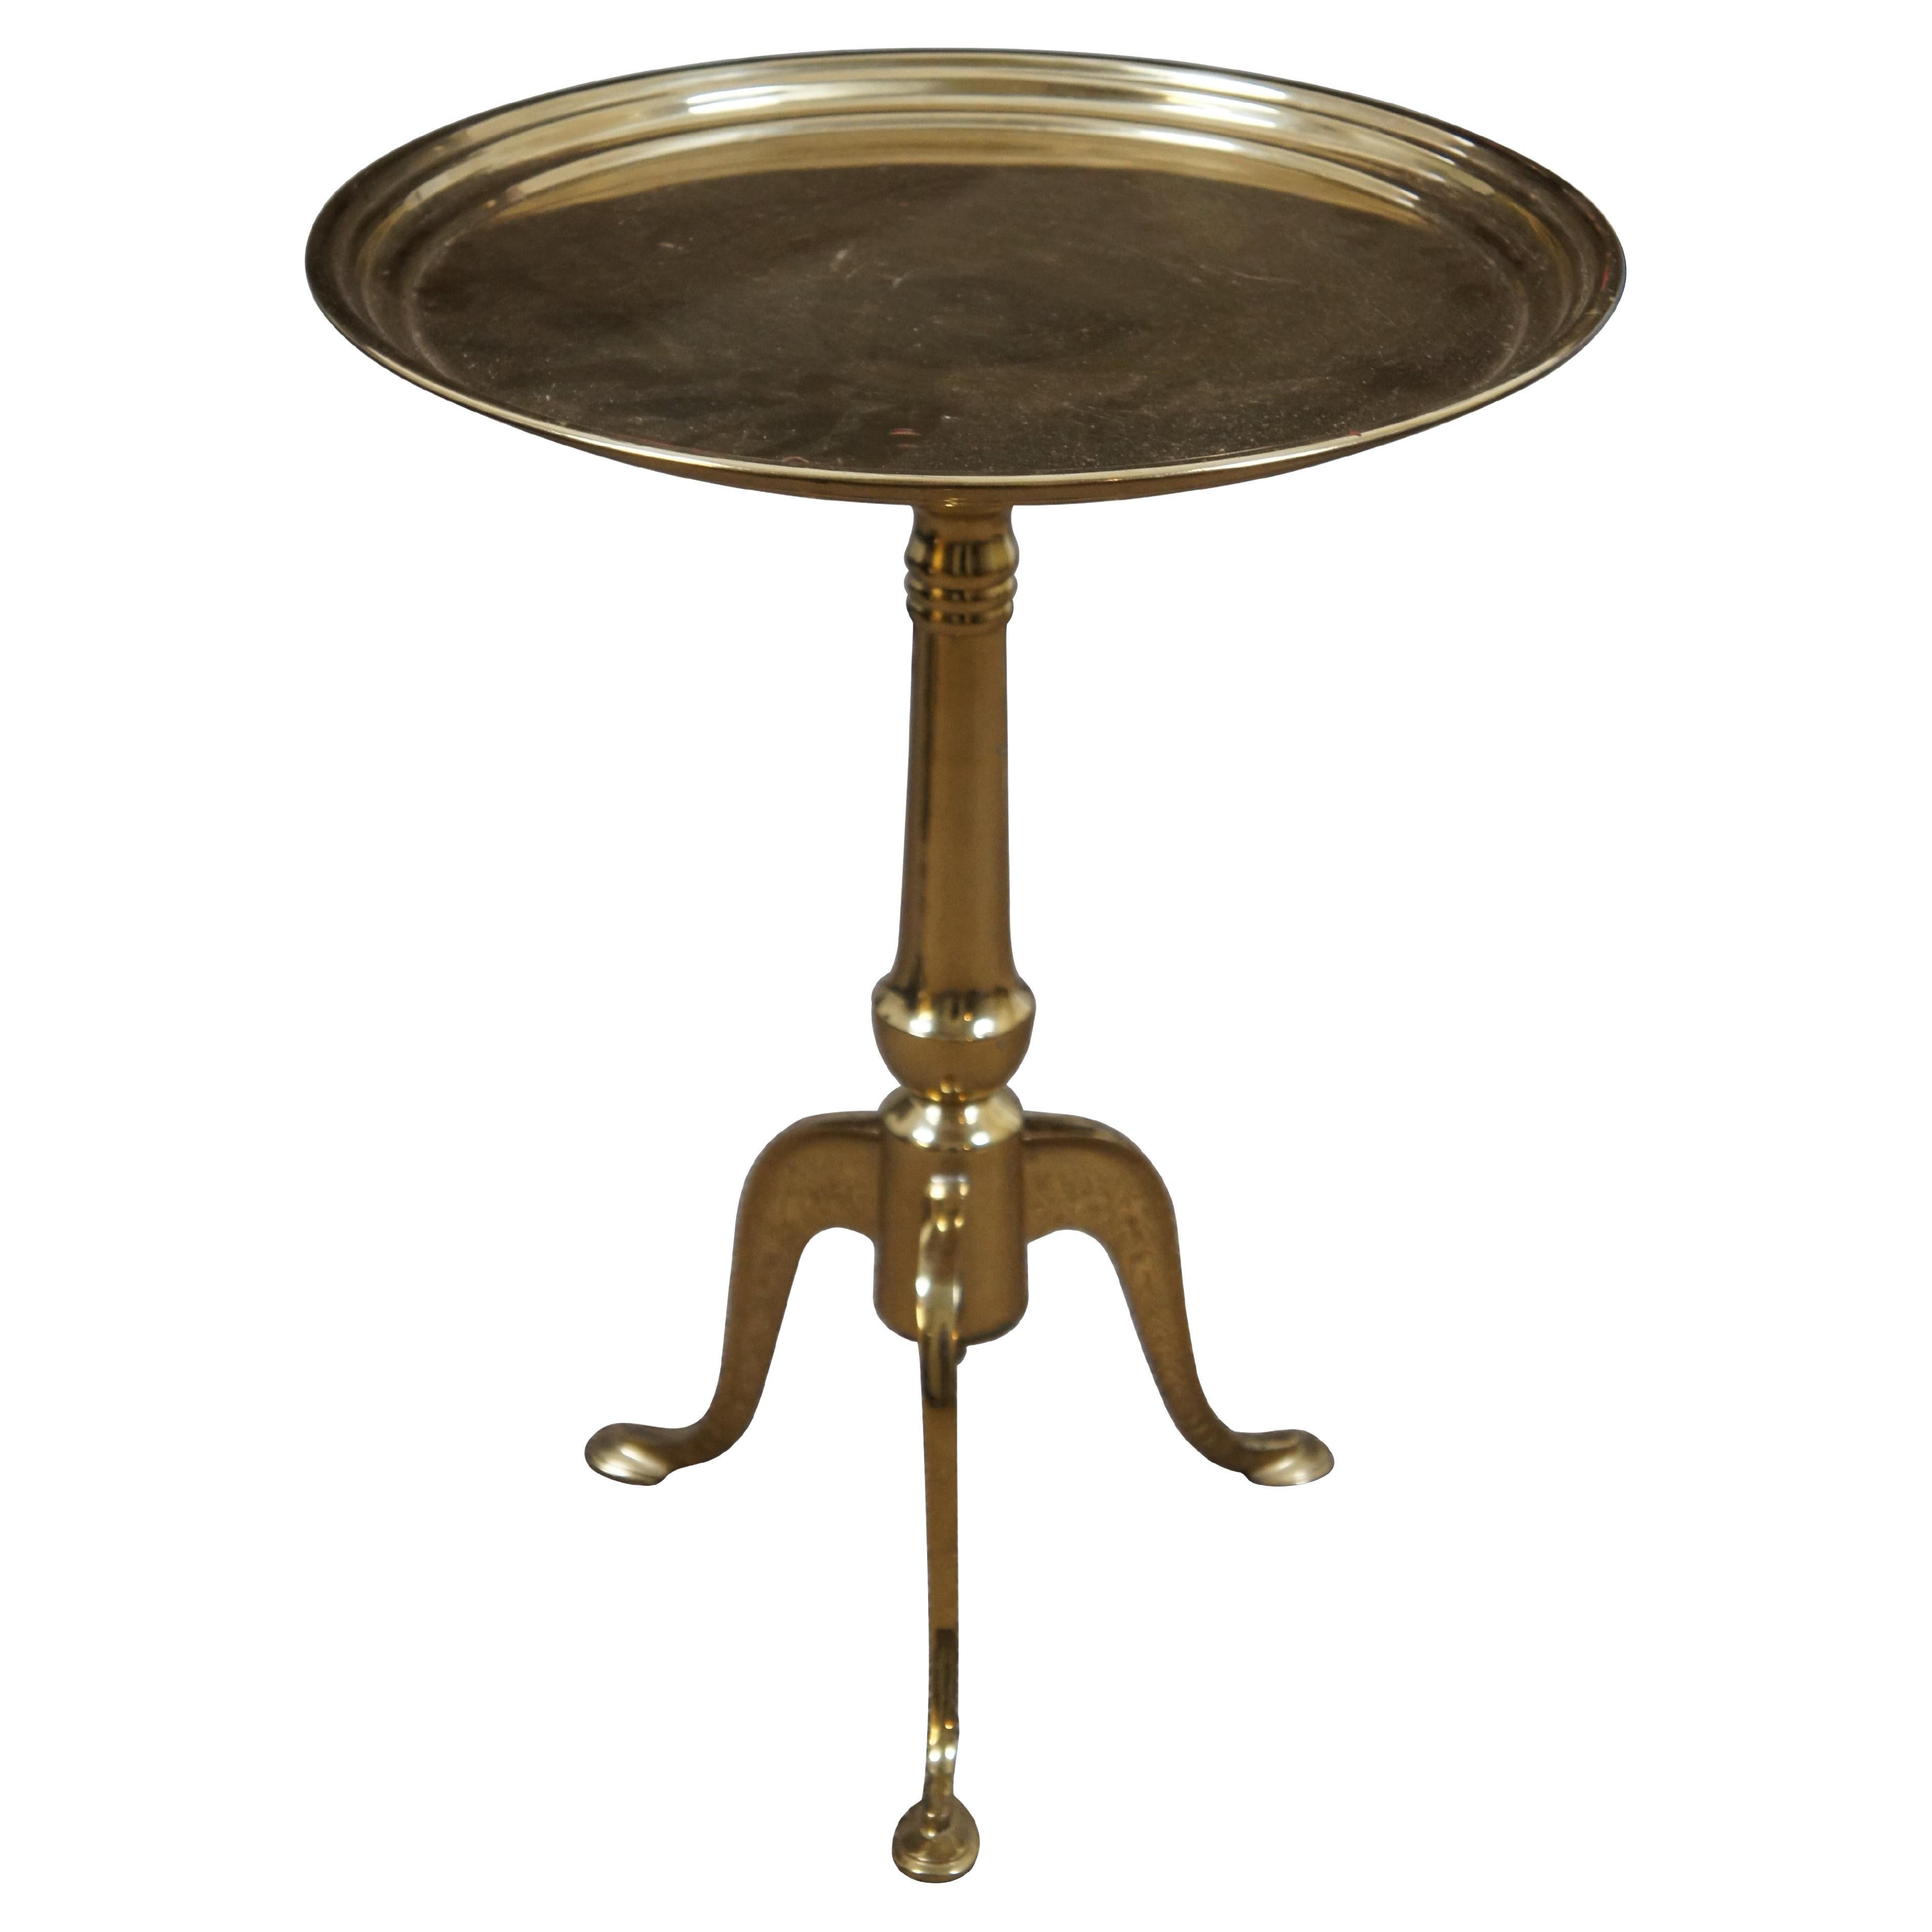 Vintage Round Brass Tripod Pedestal Plant Stand Side Accent Cocktail Table 19"